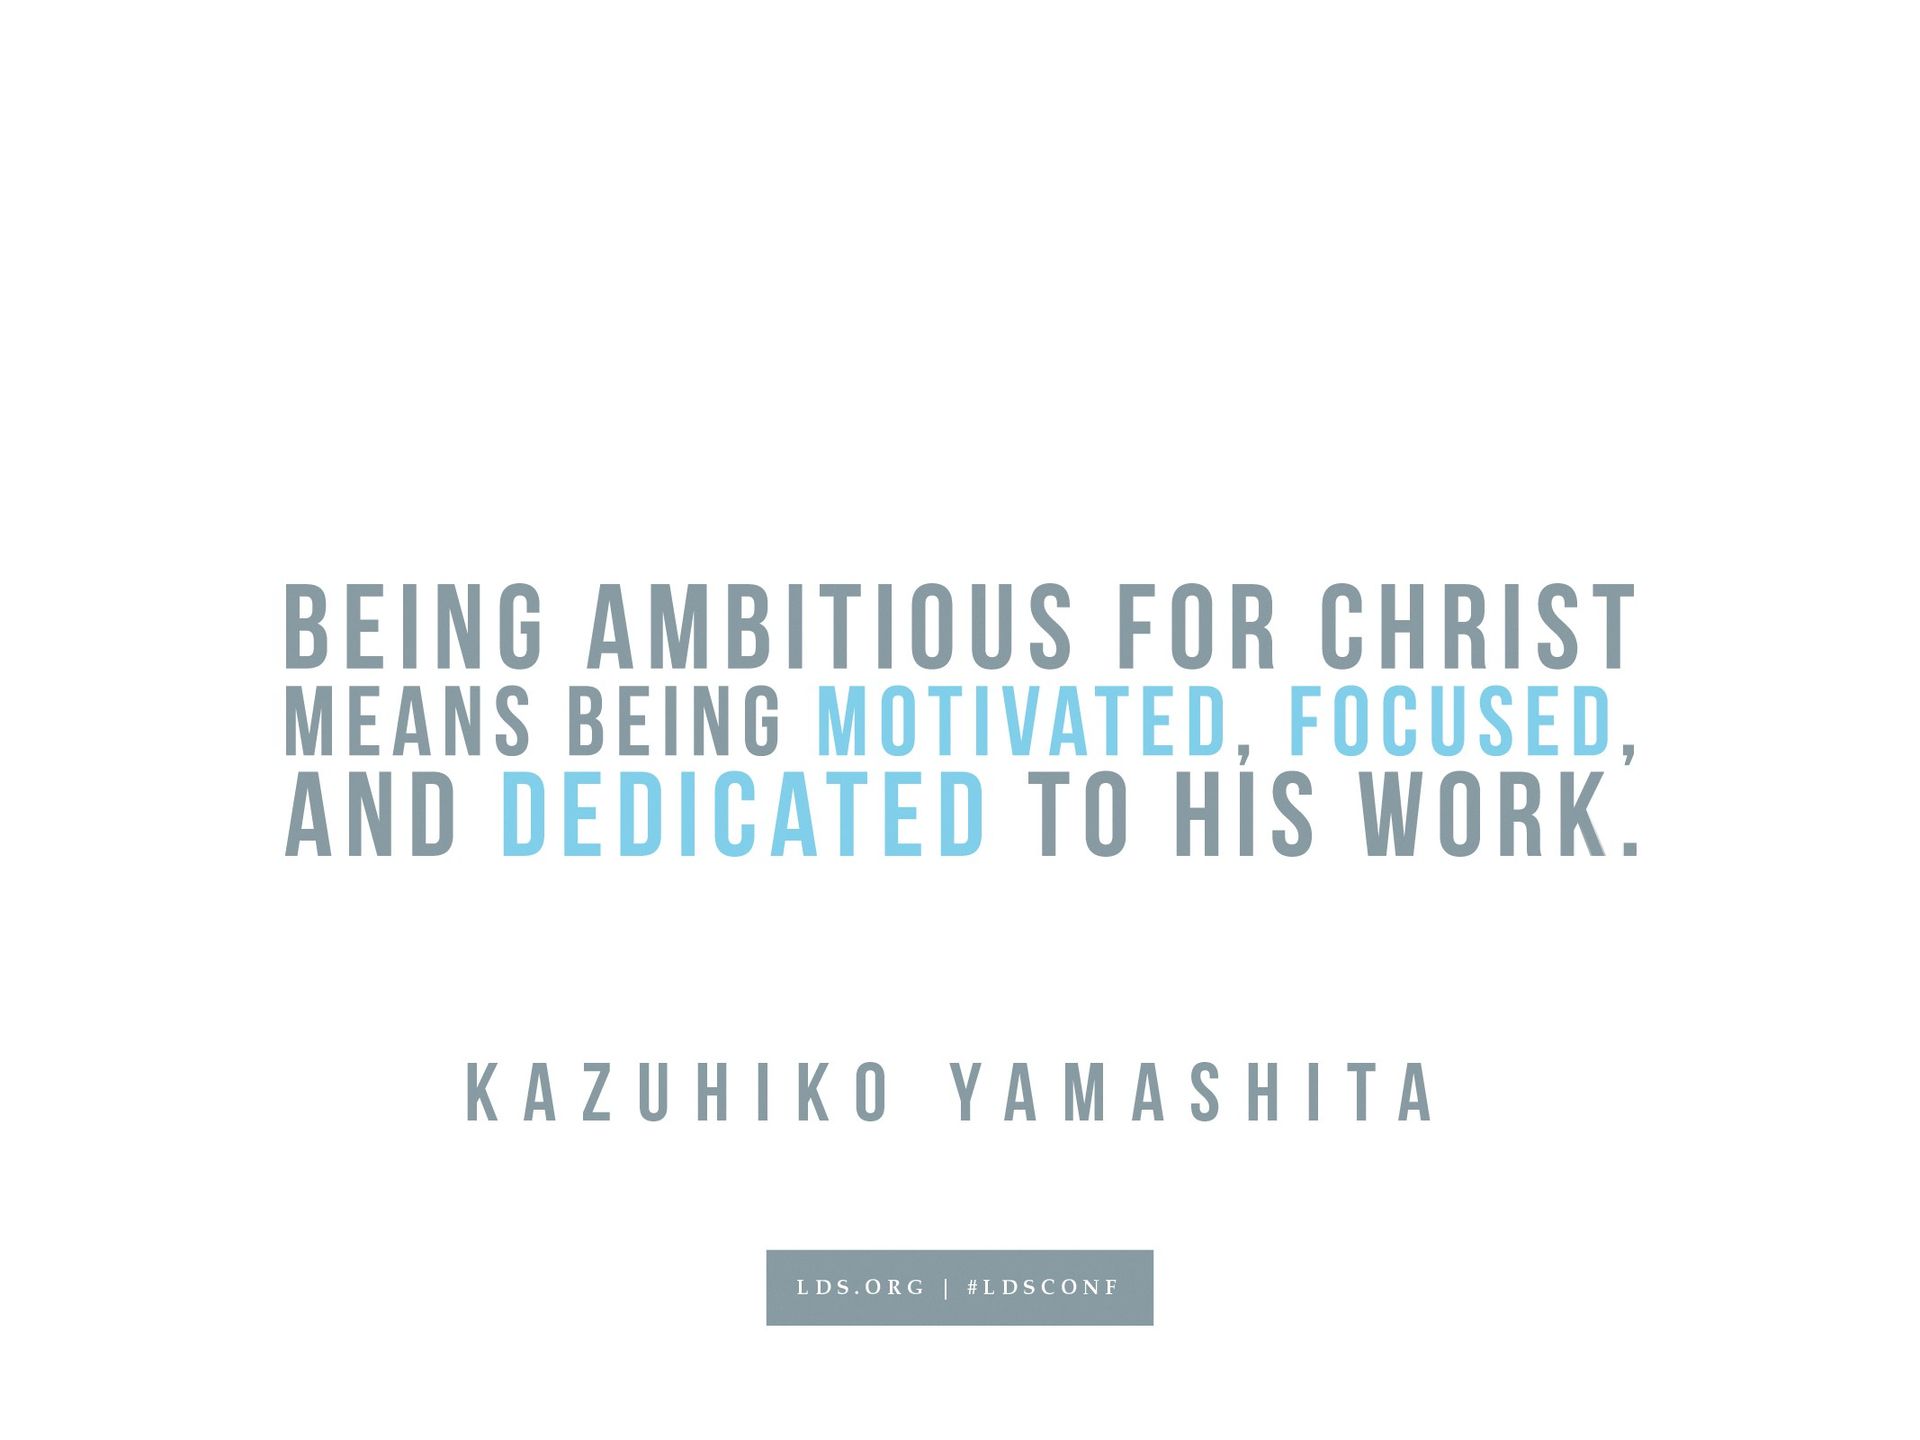 “Being ambitious for Christ means being motivated, focused, and dedicated to His work.”—Kazuhiko Yamashita, “Be Ambitious for Christ”